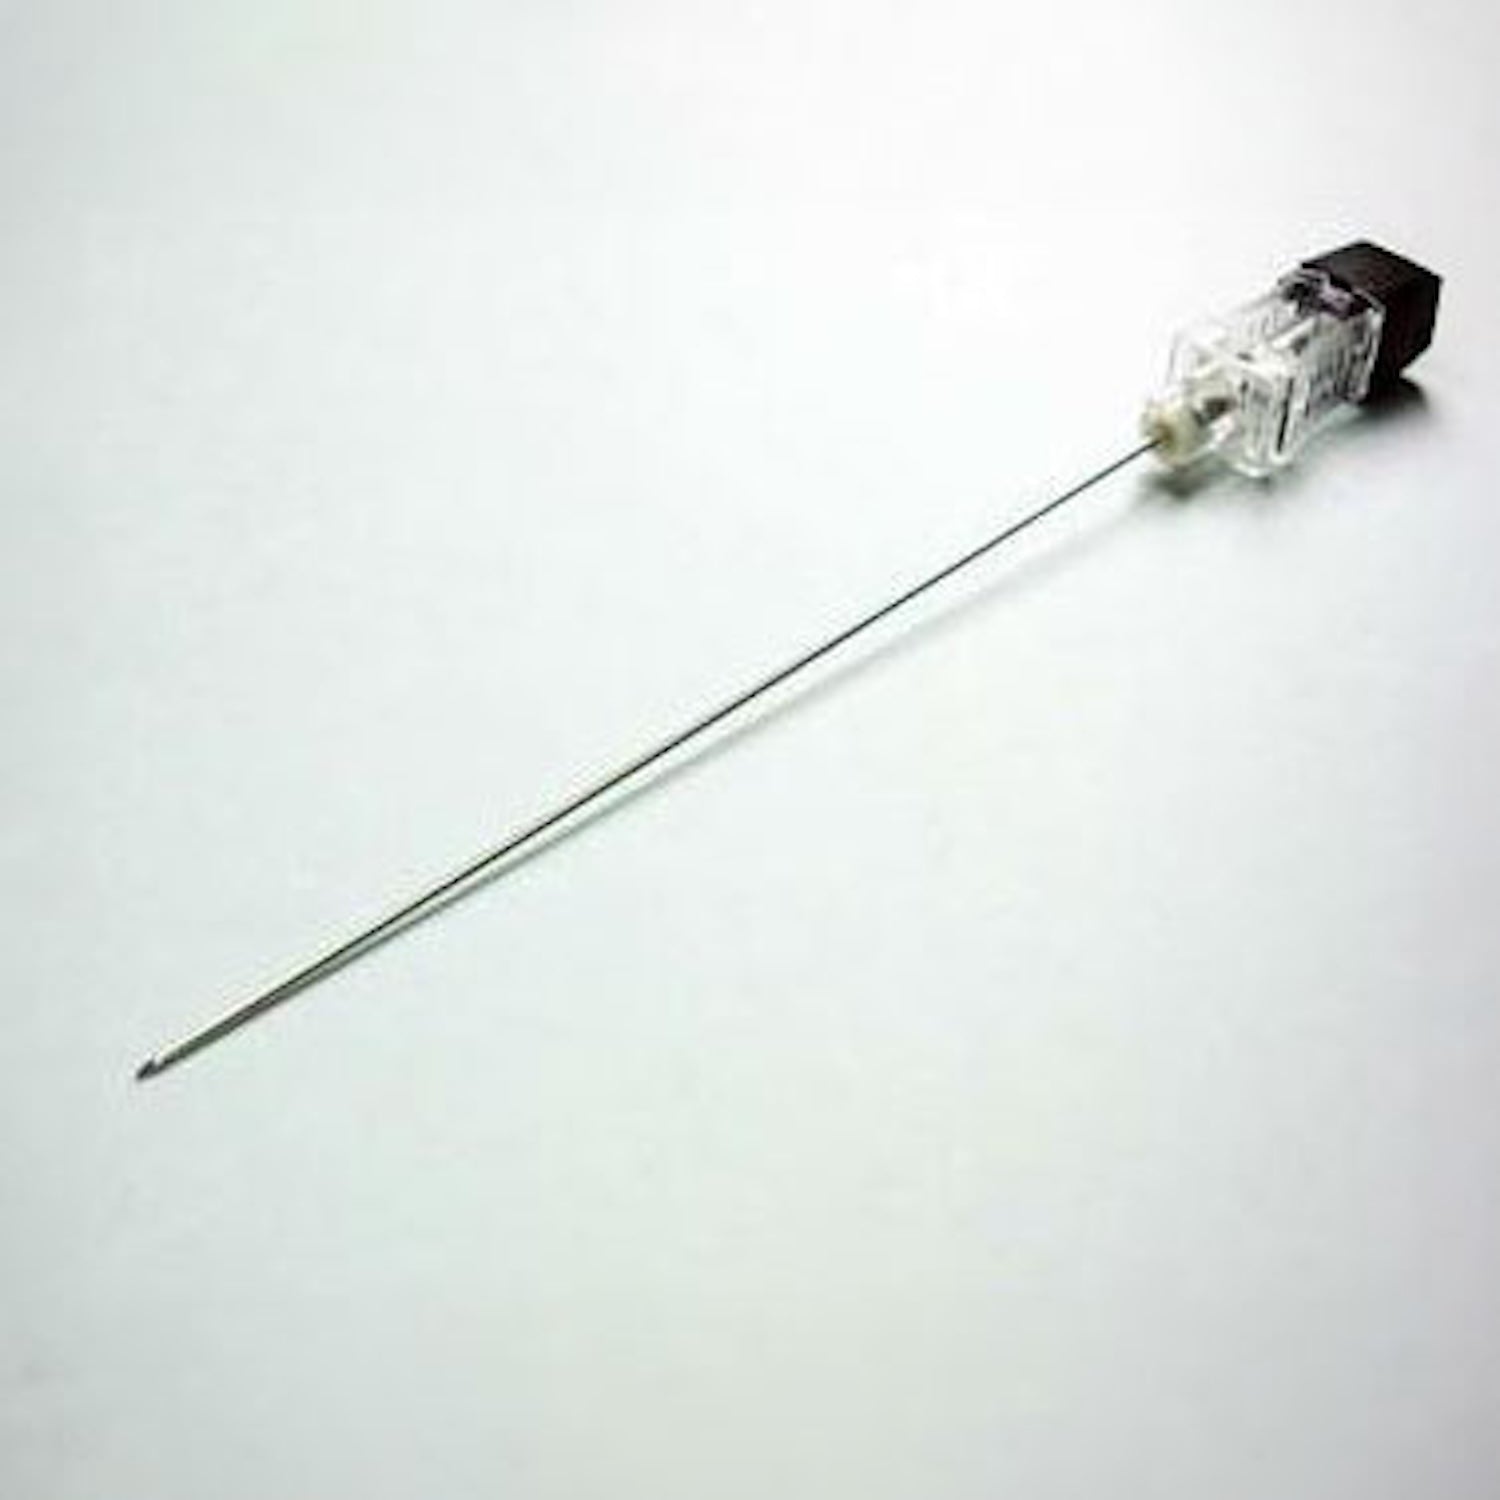 BD Long Length Spinal Needle with Quincke Bevel | Sterile | 22G | 177.8mm Long | Black | Case of 50